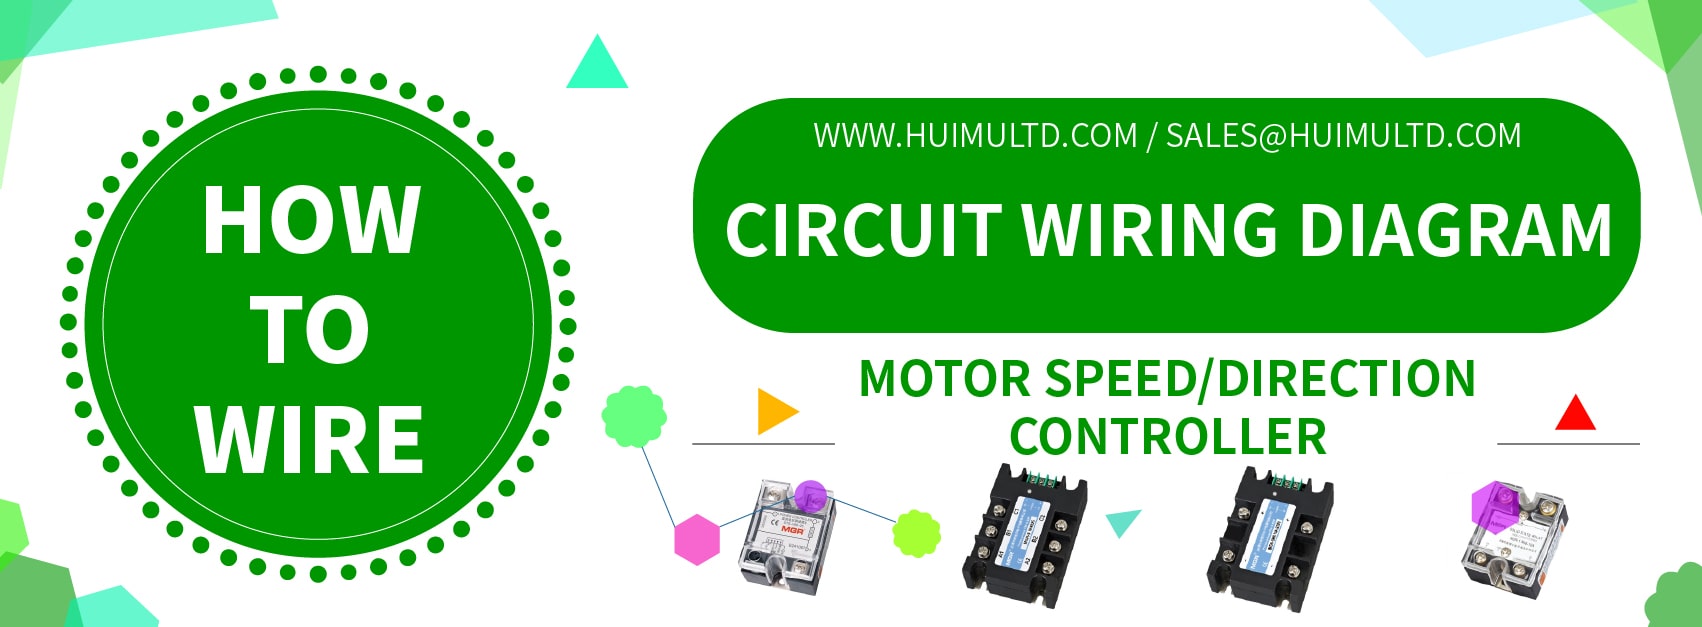 How to wire motor speed or direction controller? banner